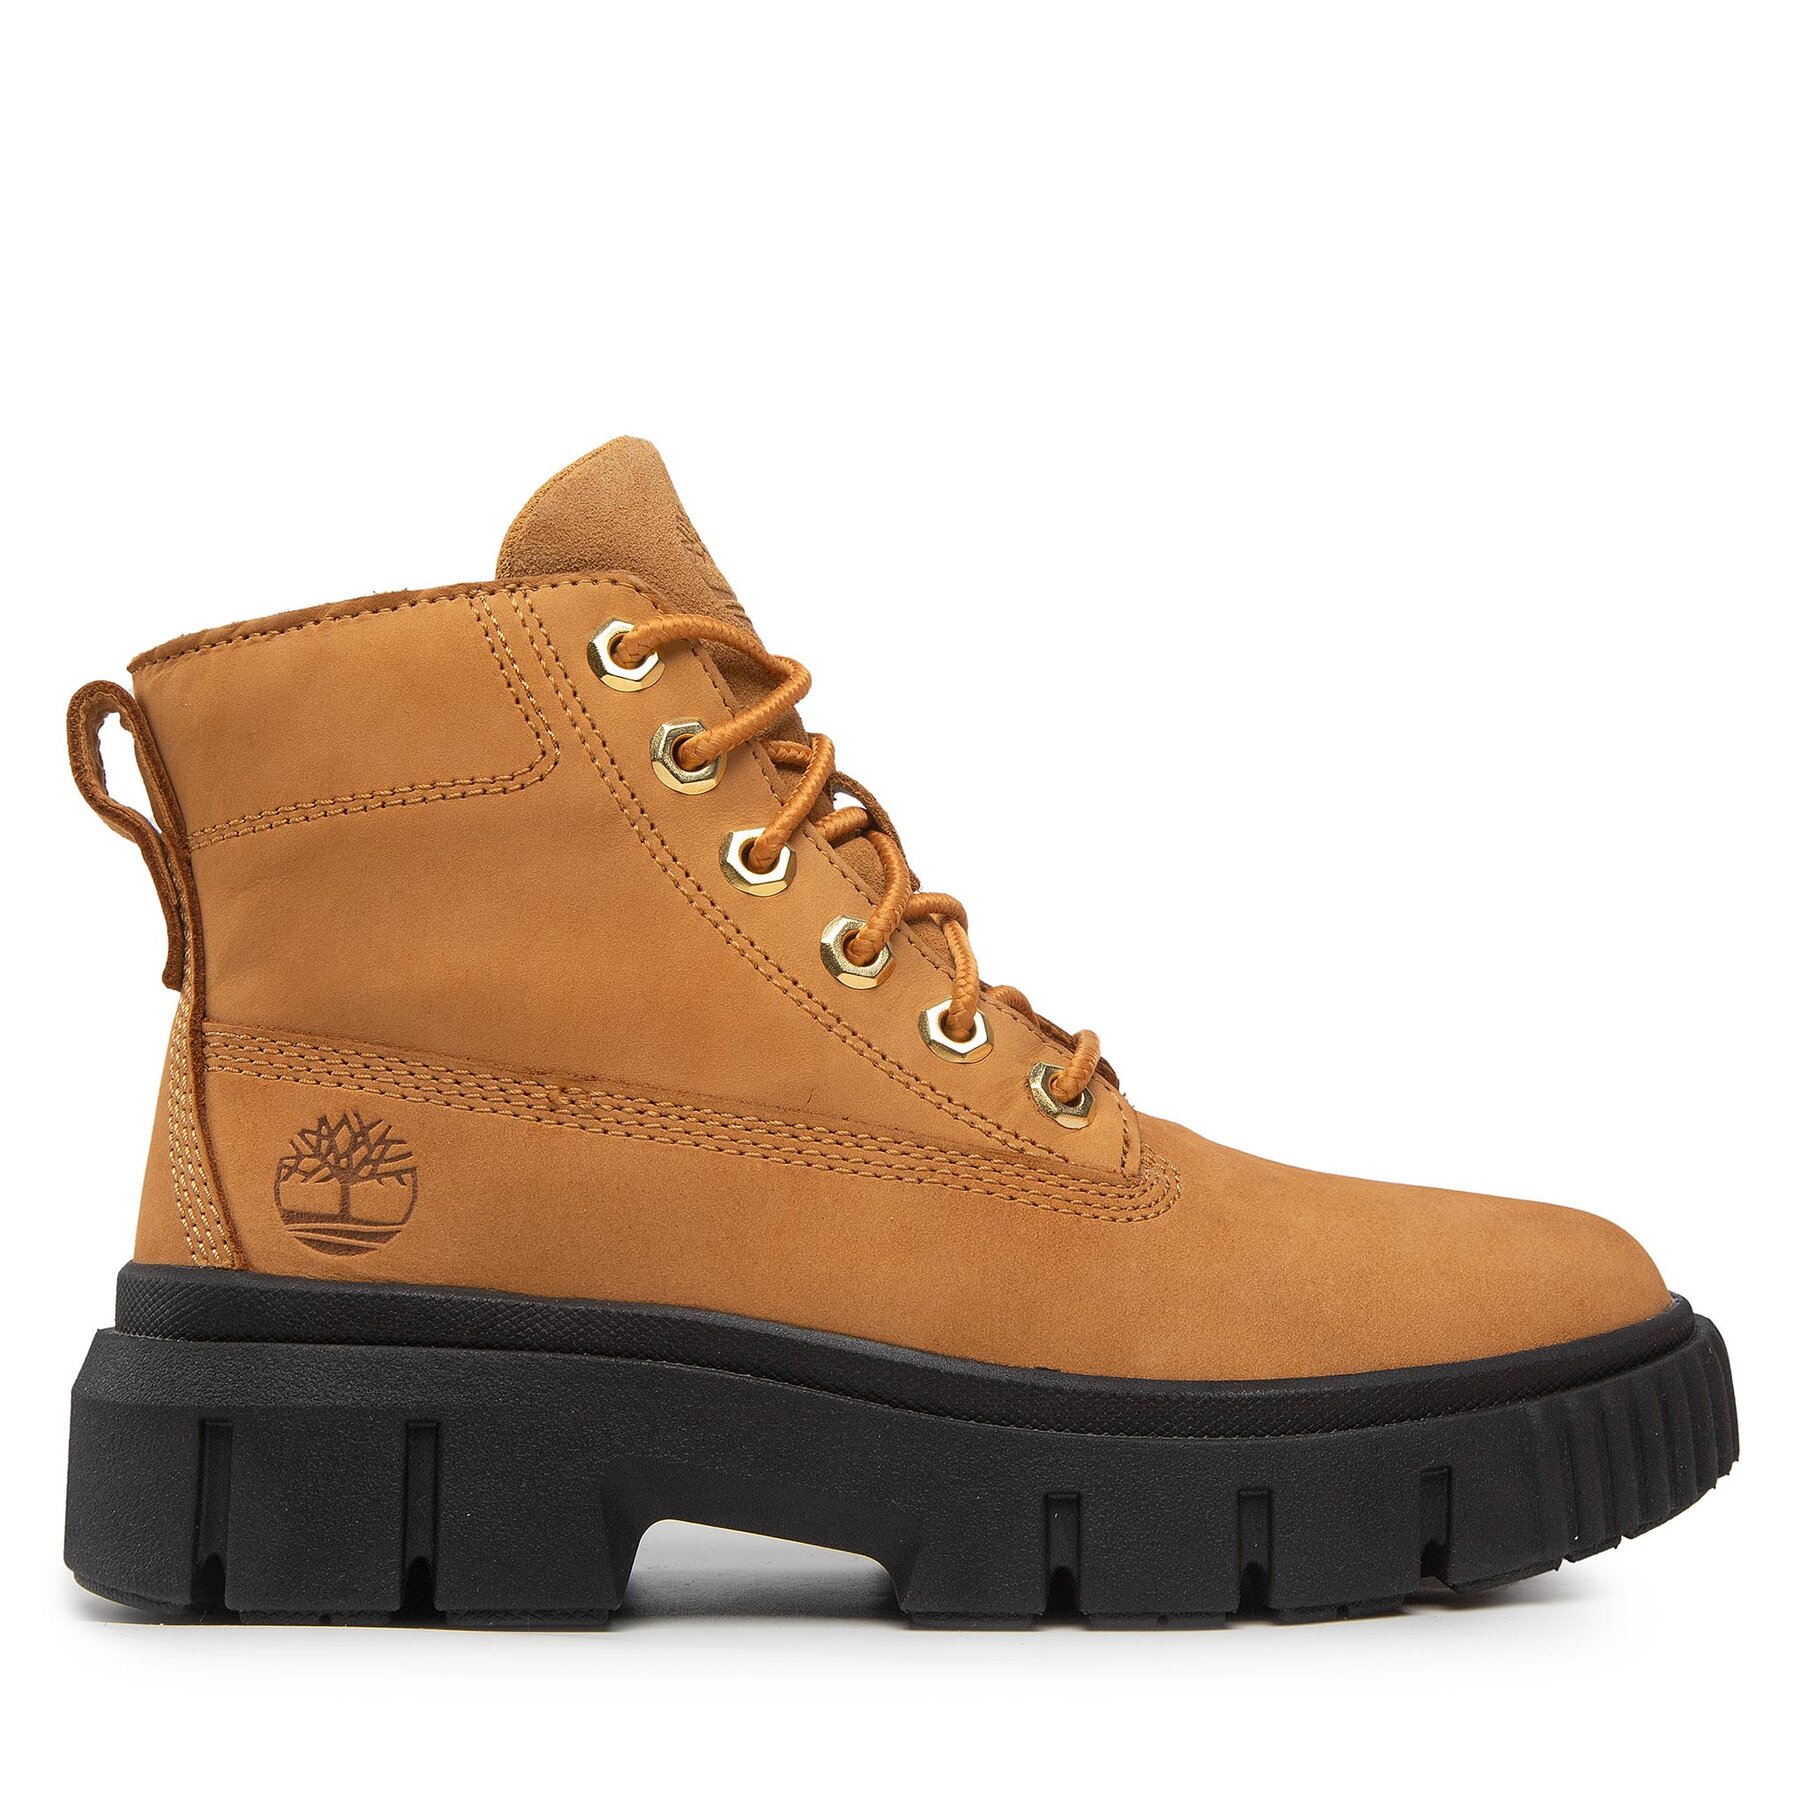 Timberland Greyfield Leather wheat - Botines de mujer